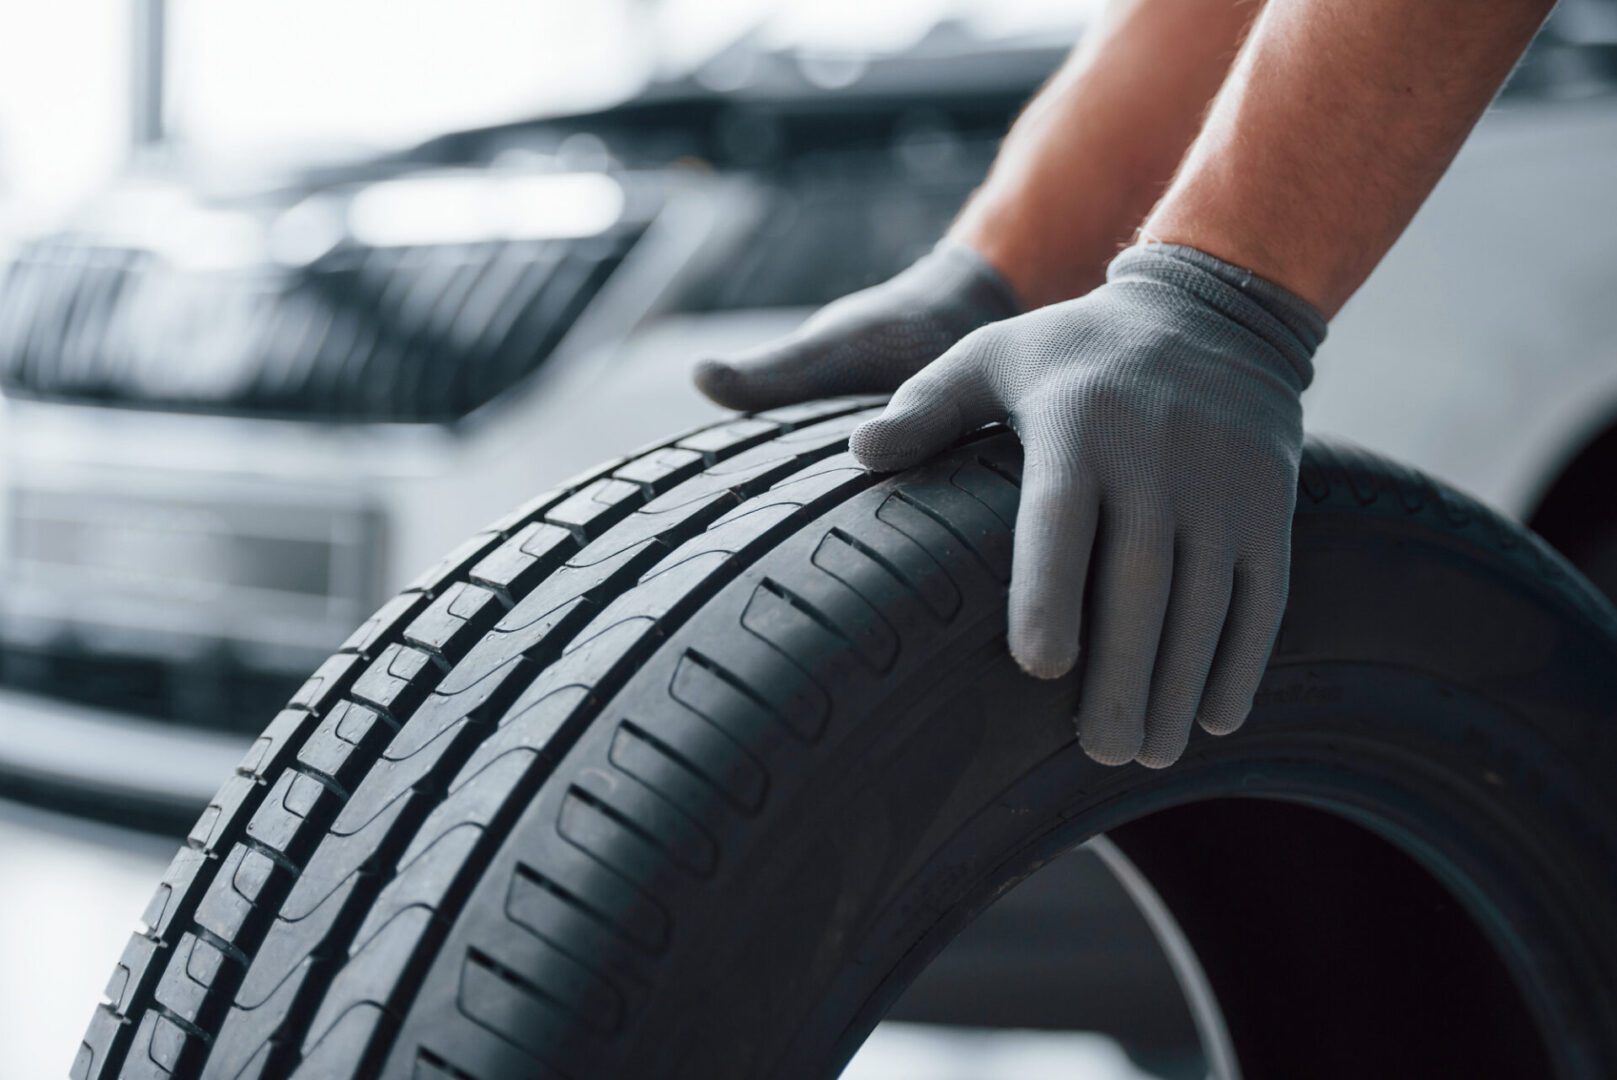 Step By Step To Purchase Your Tyres Online